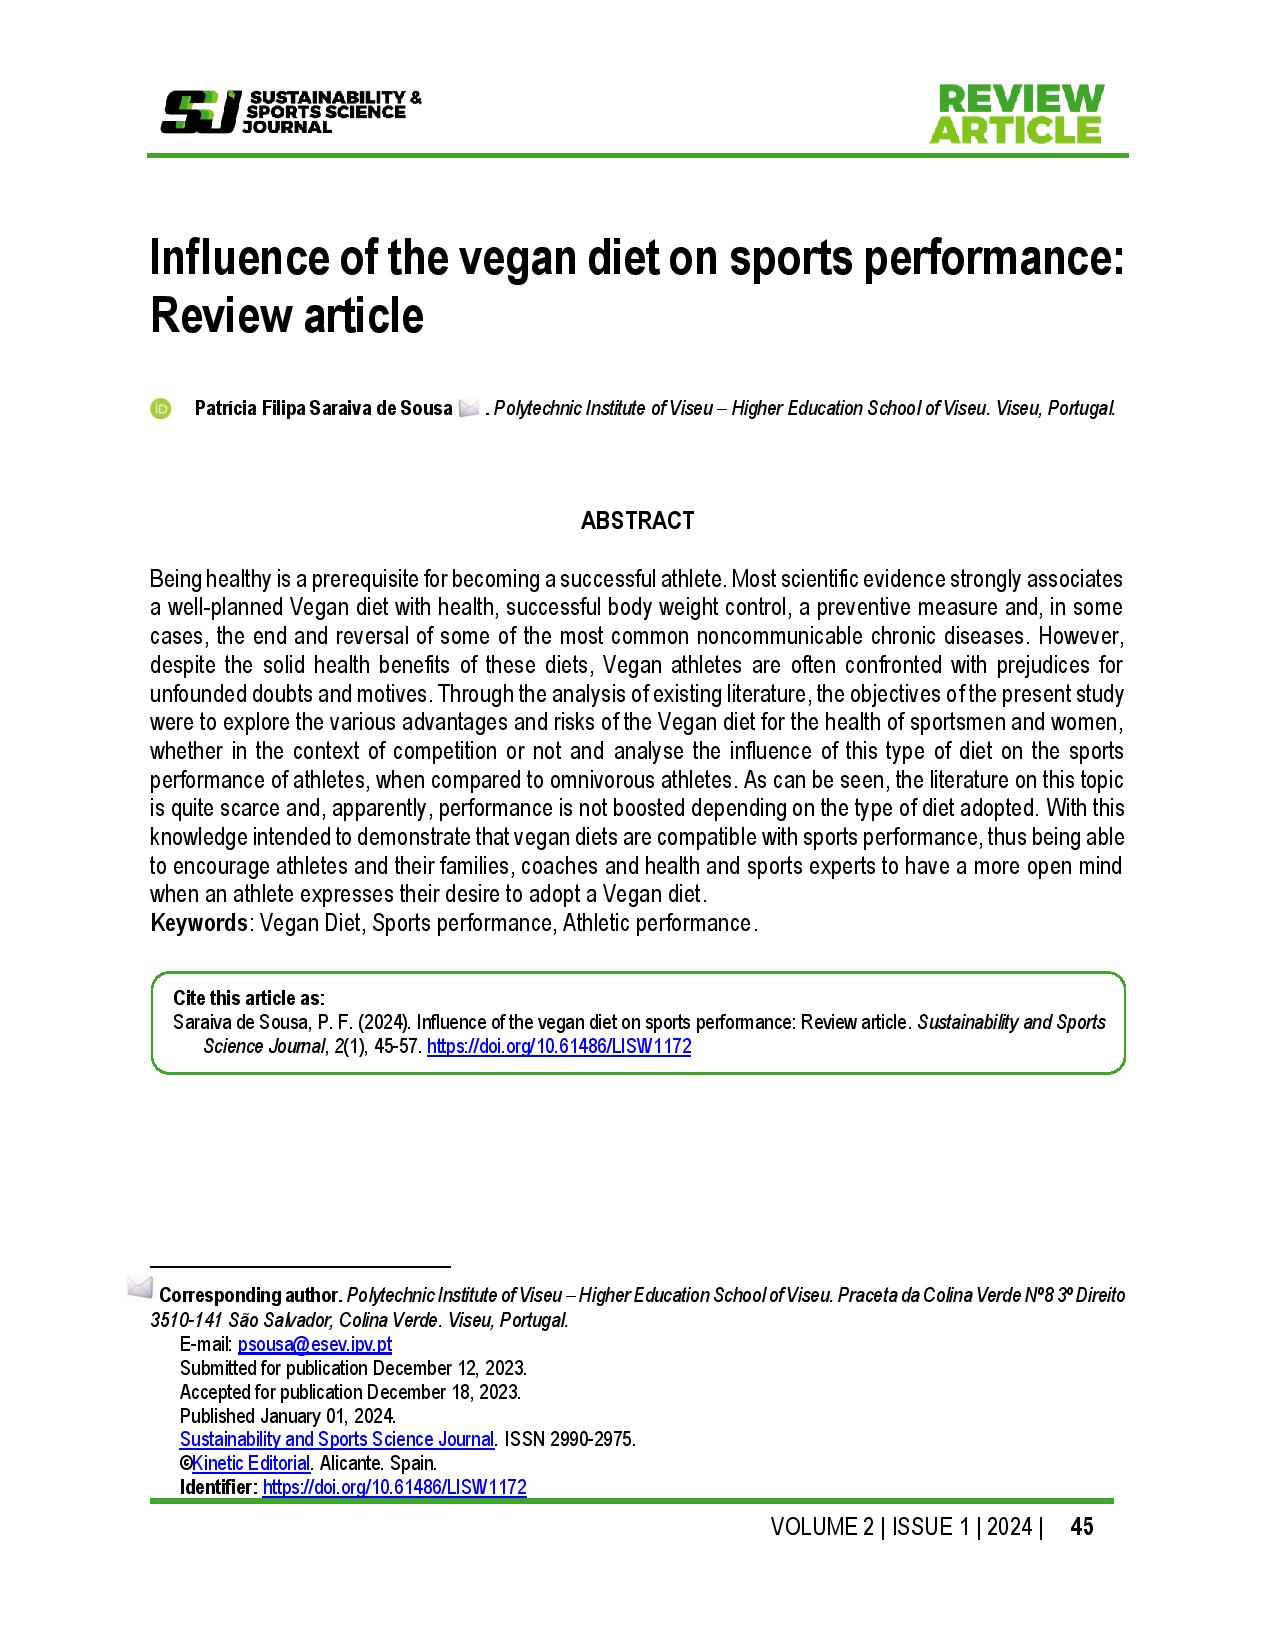 Influence of the vegan diet on sports performance: Review article